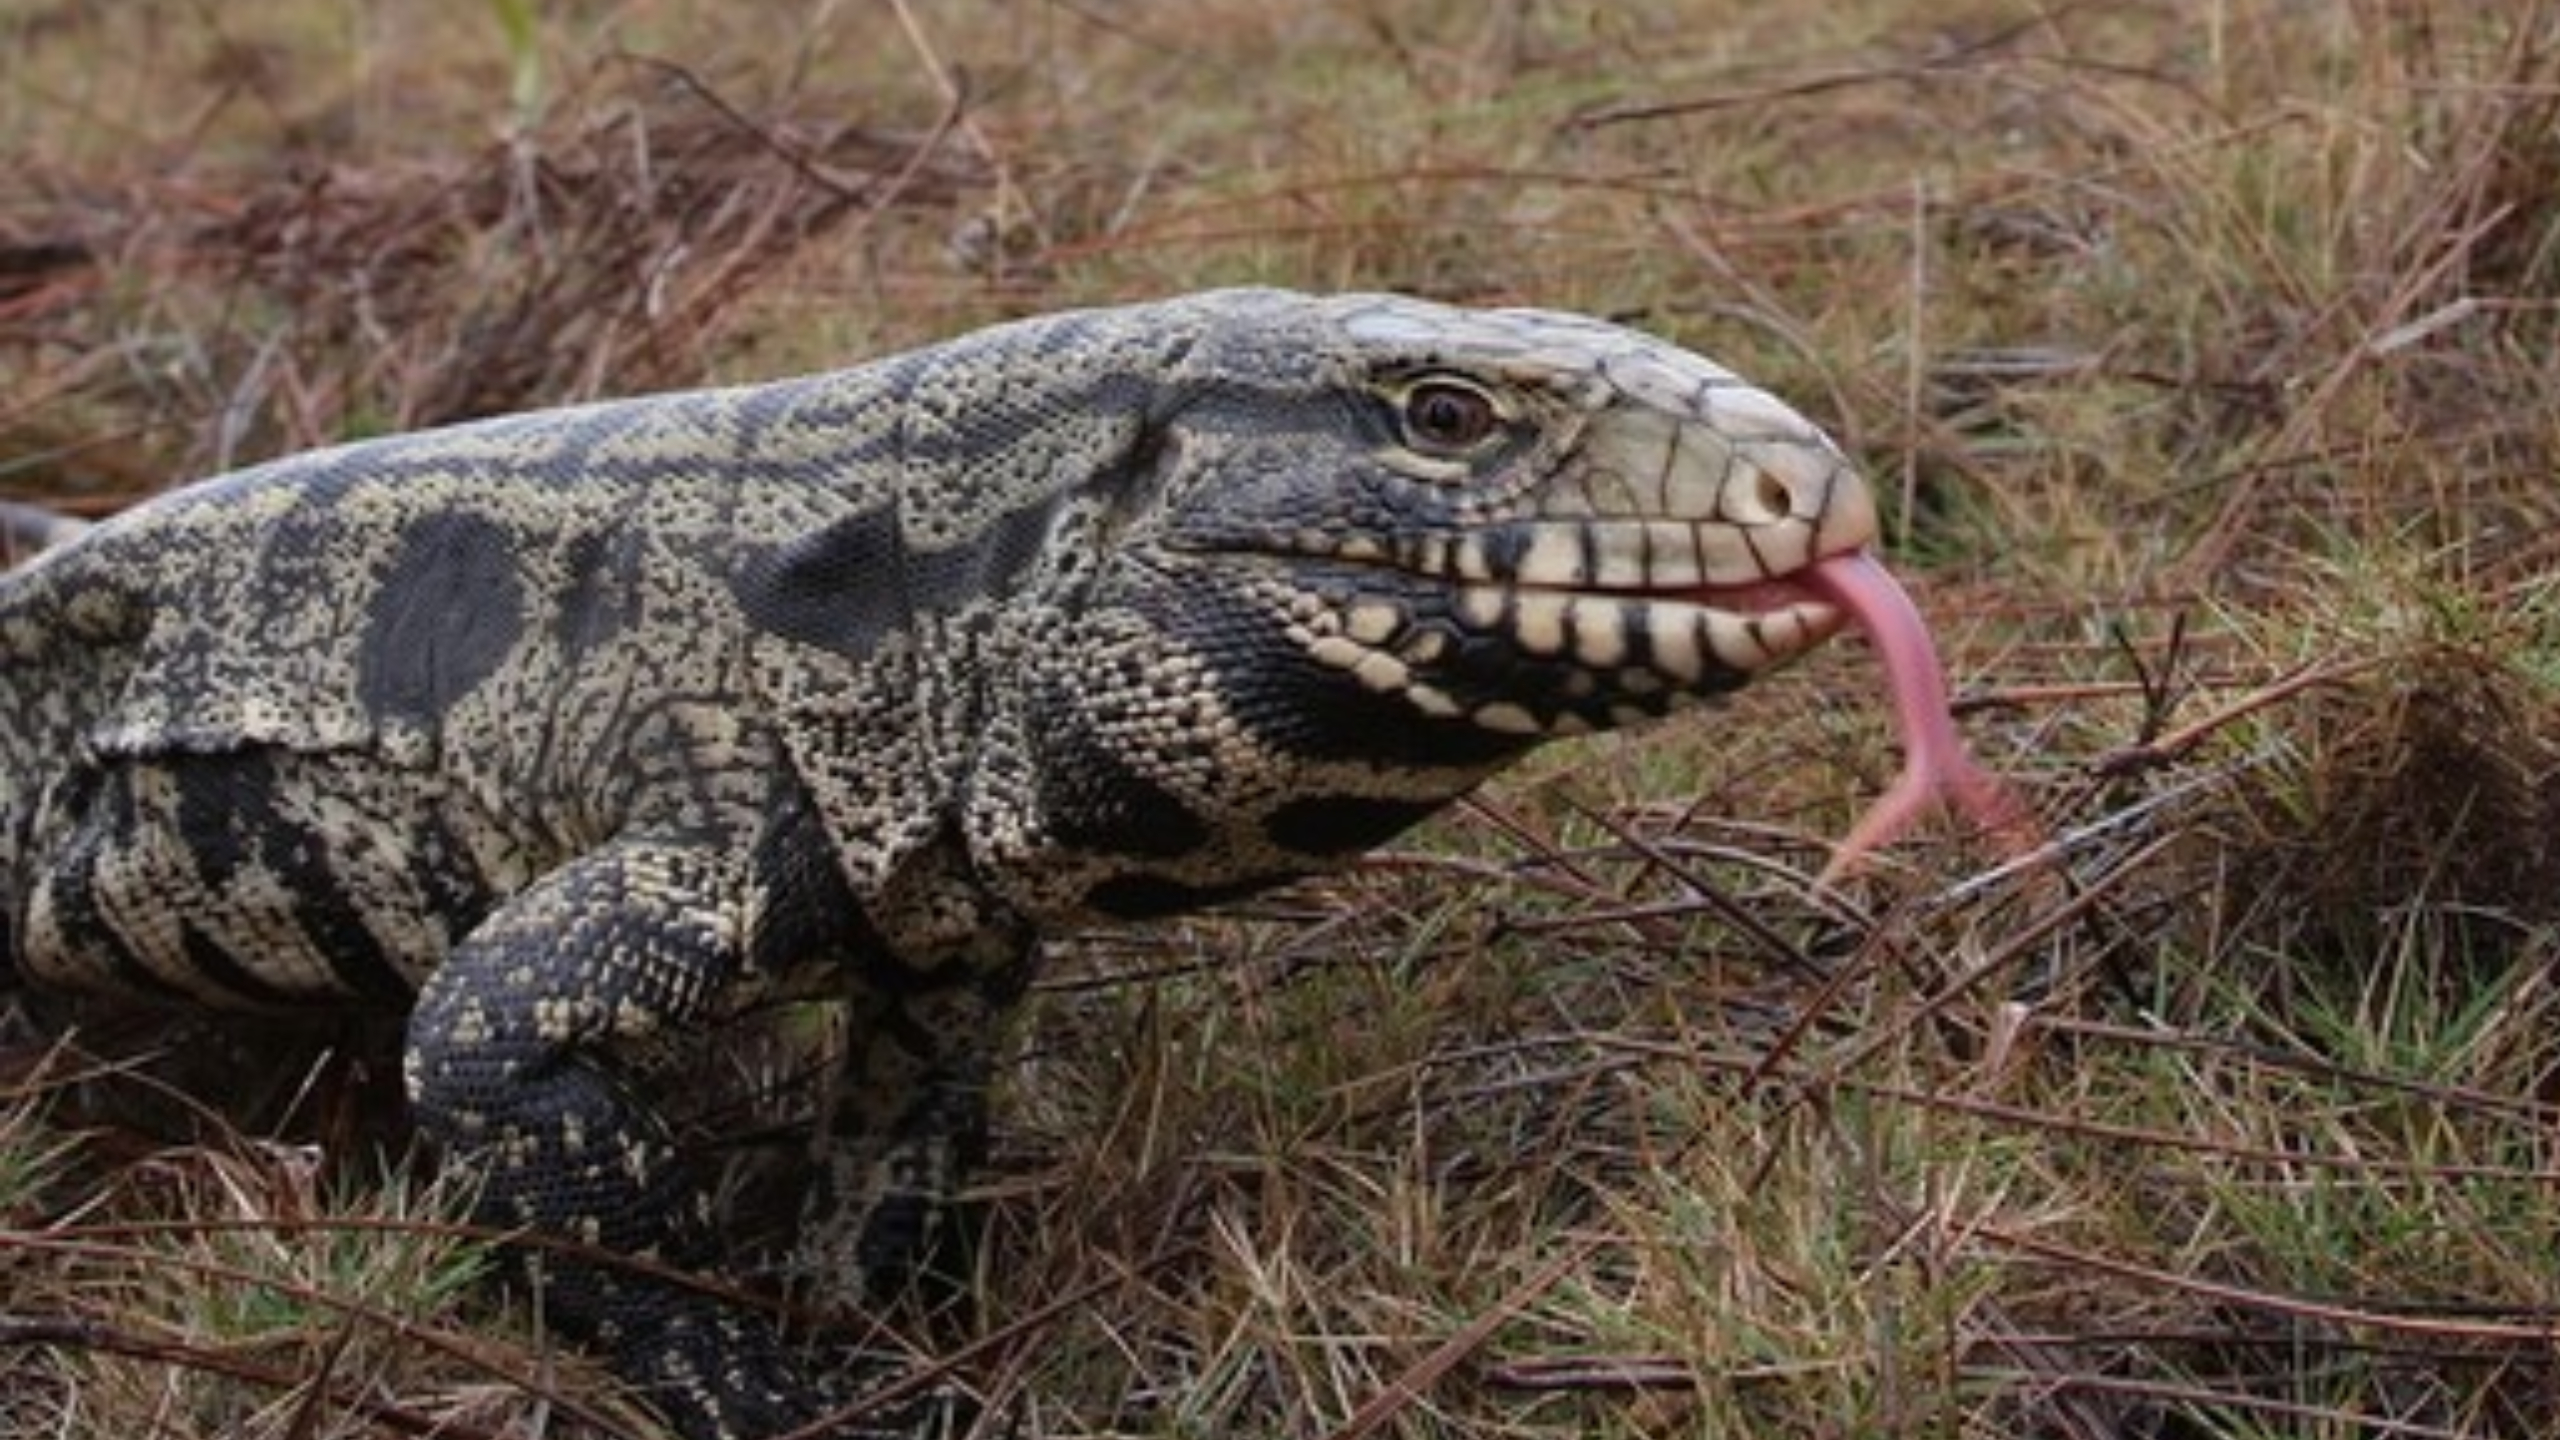 SCDNR reports first sighting of black and white tegu lizard in SC